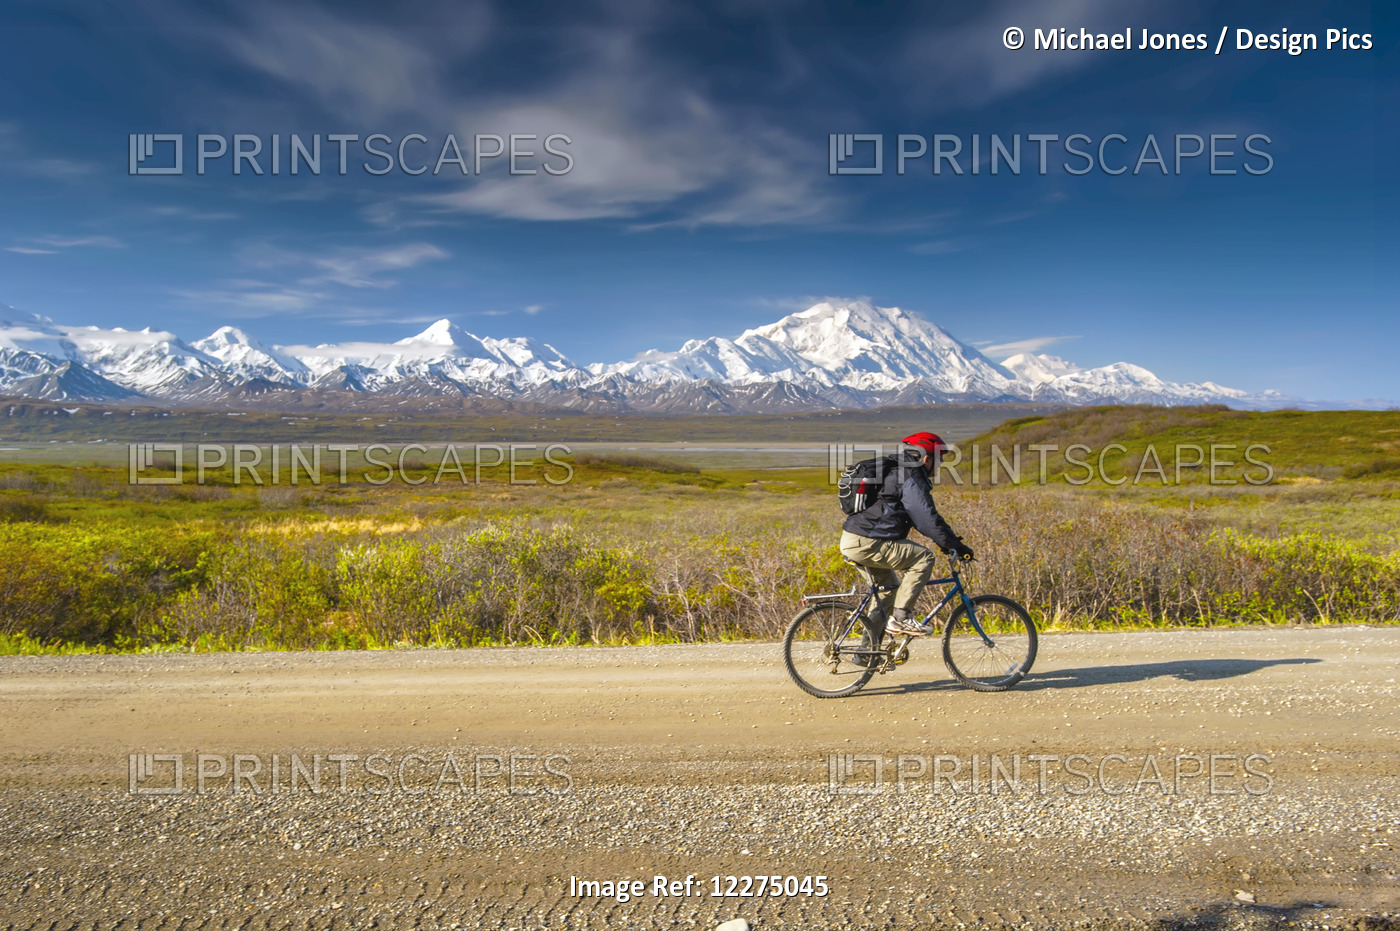 Bicyclist On The Park Road With Mt. Mckinley And The Alaska Range In The ...